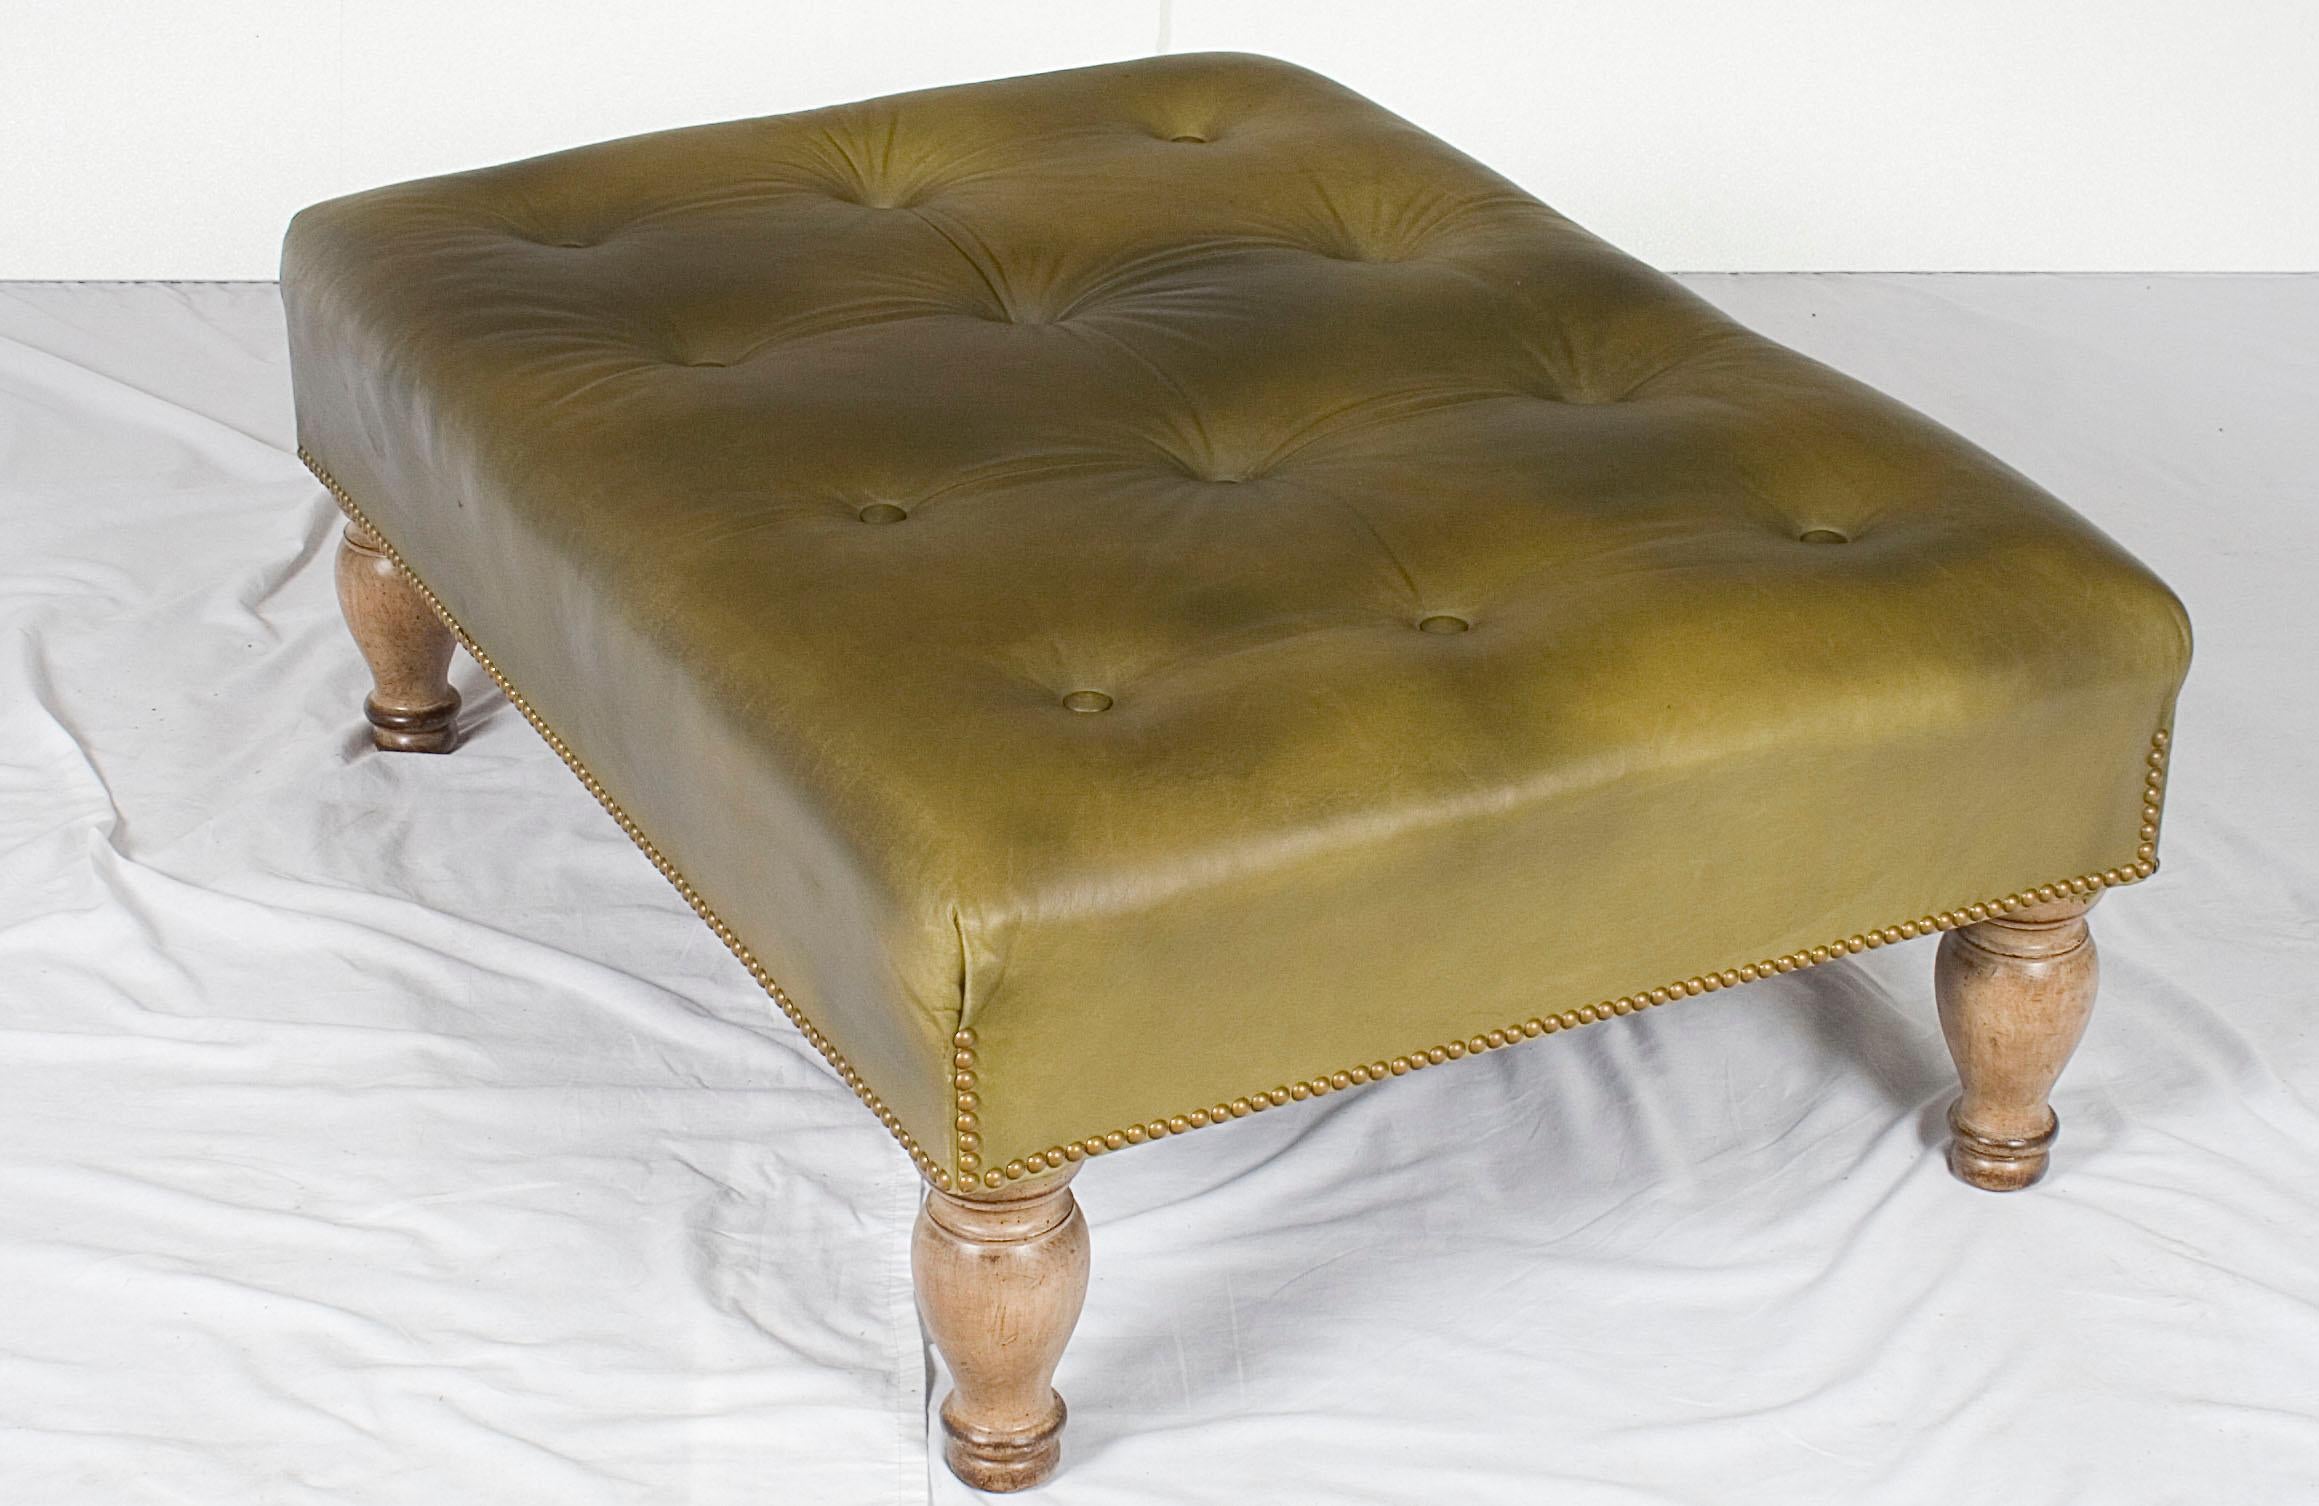 This particular vintage large leather ottoman possesses a depth and character than can only be acquired through years of life. The supple leather exudes charm and the turned legs provide wonderful support.

The underneath of this piece bears the